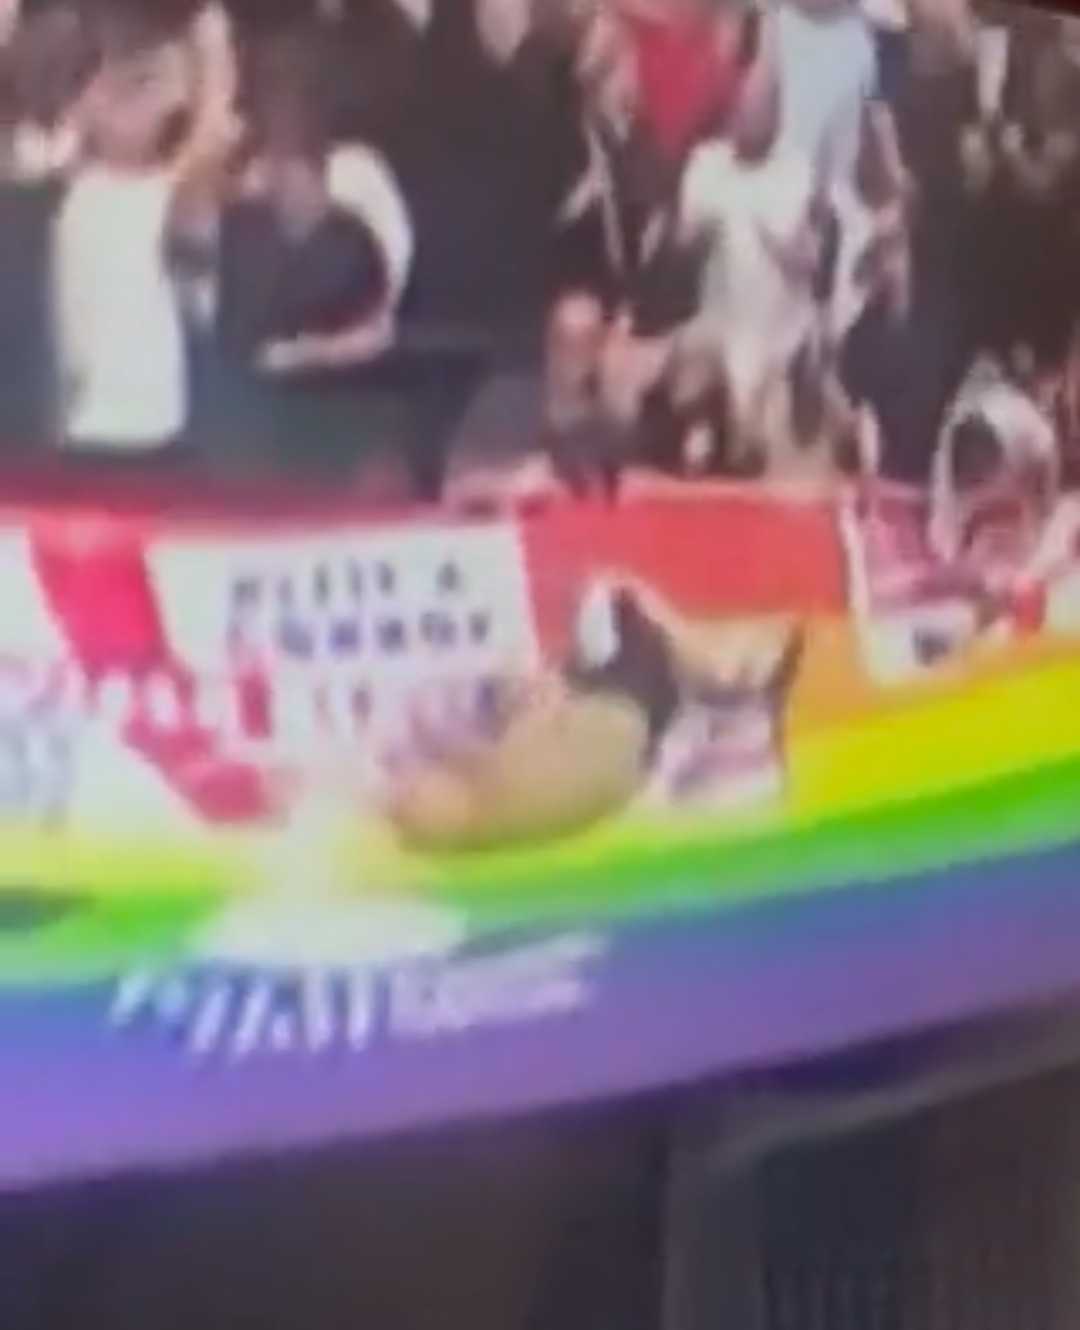 Watch: Sheffield United fan falls and rolls over a LGBTQ banner while celebrating the opening goal